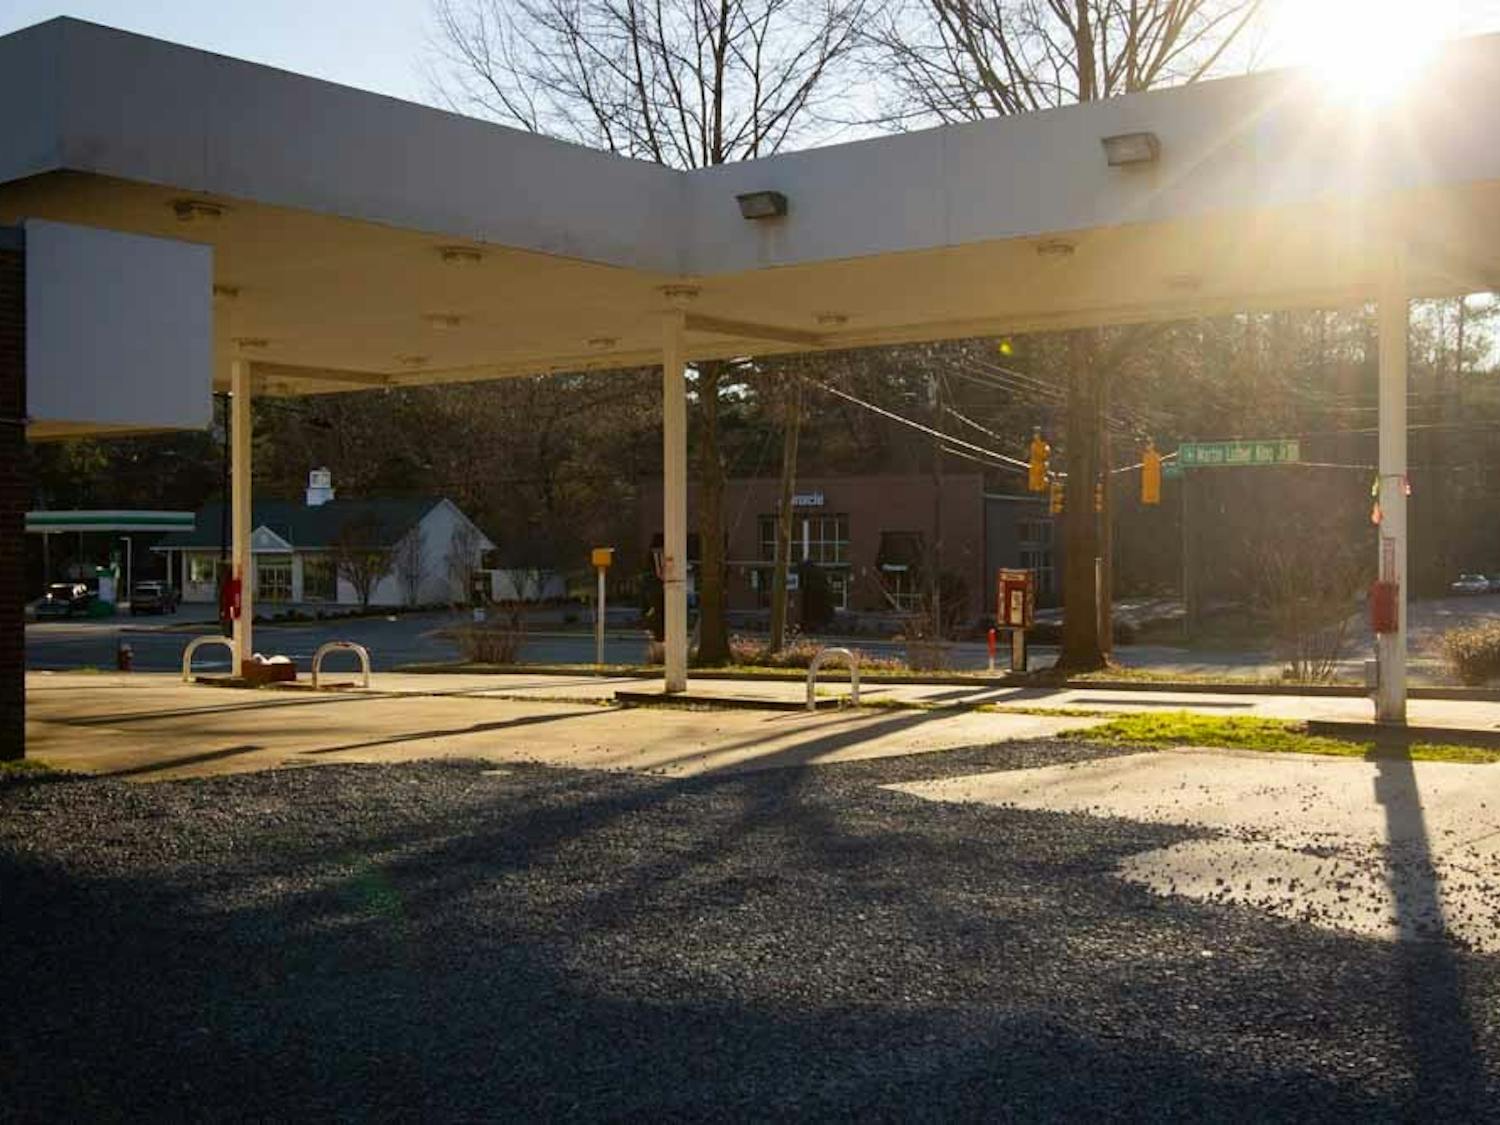 The Chapel Hill Town Council will vote on a project that would redevelop the nonoperational Marathon Service Station and the Tar Heel Mobile Home Park into a new gas station, storage building, and convenience store. The Marathon Service Station is pictured on Saturday, March 6th, 2021.